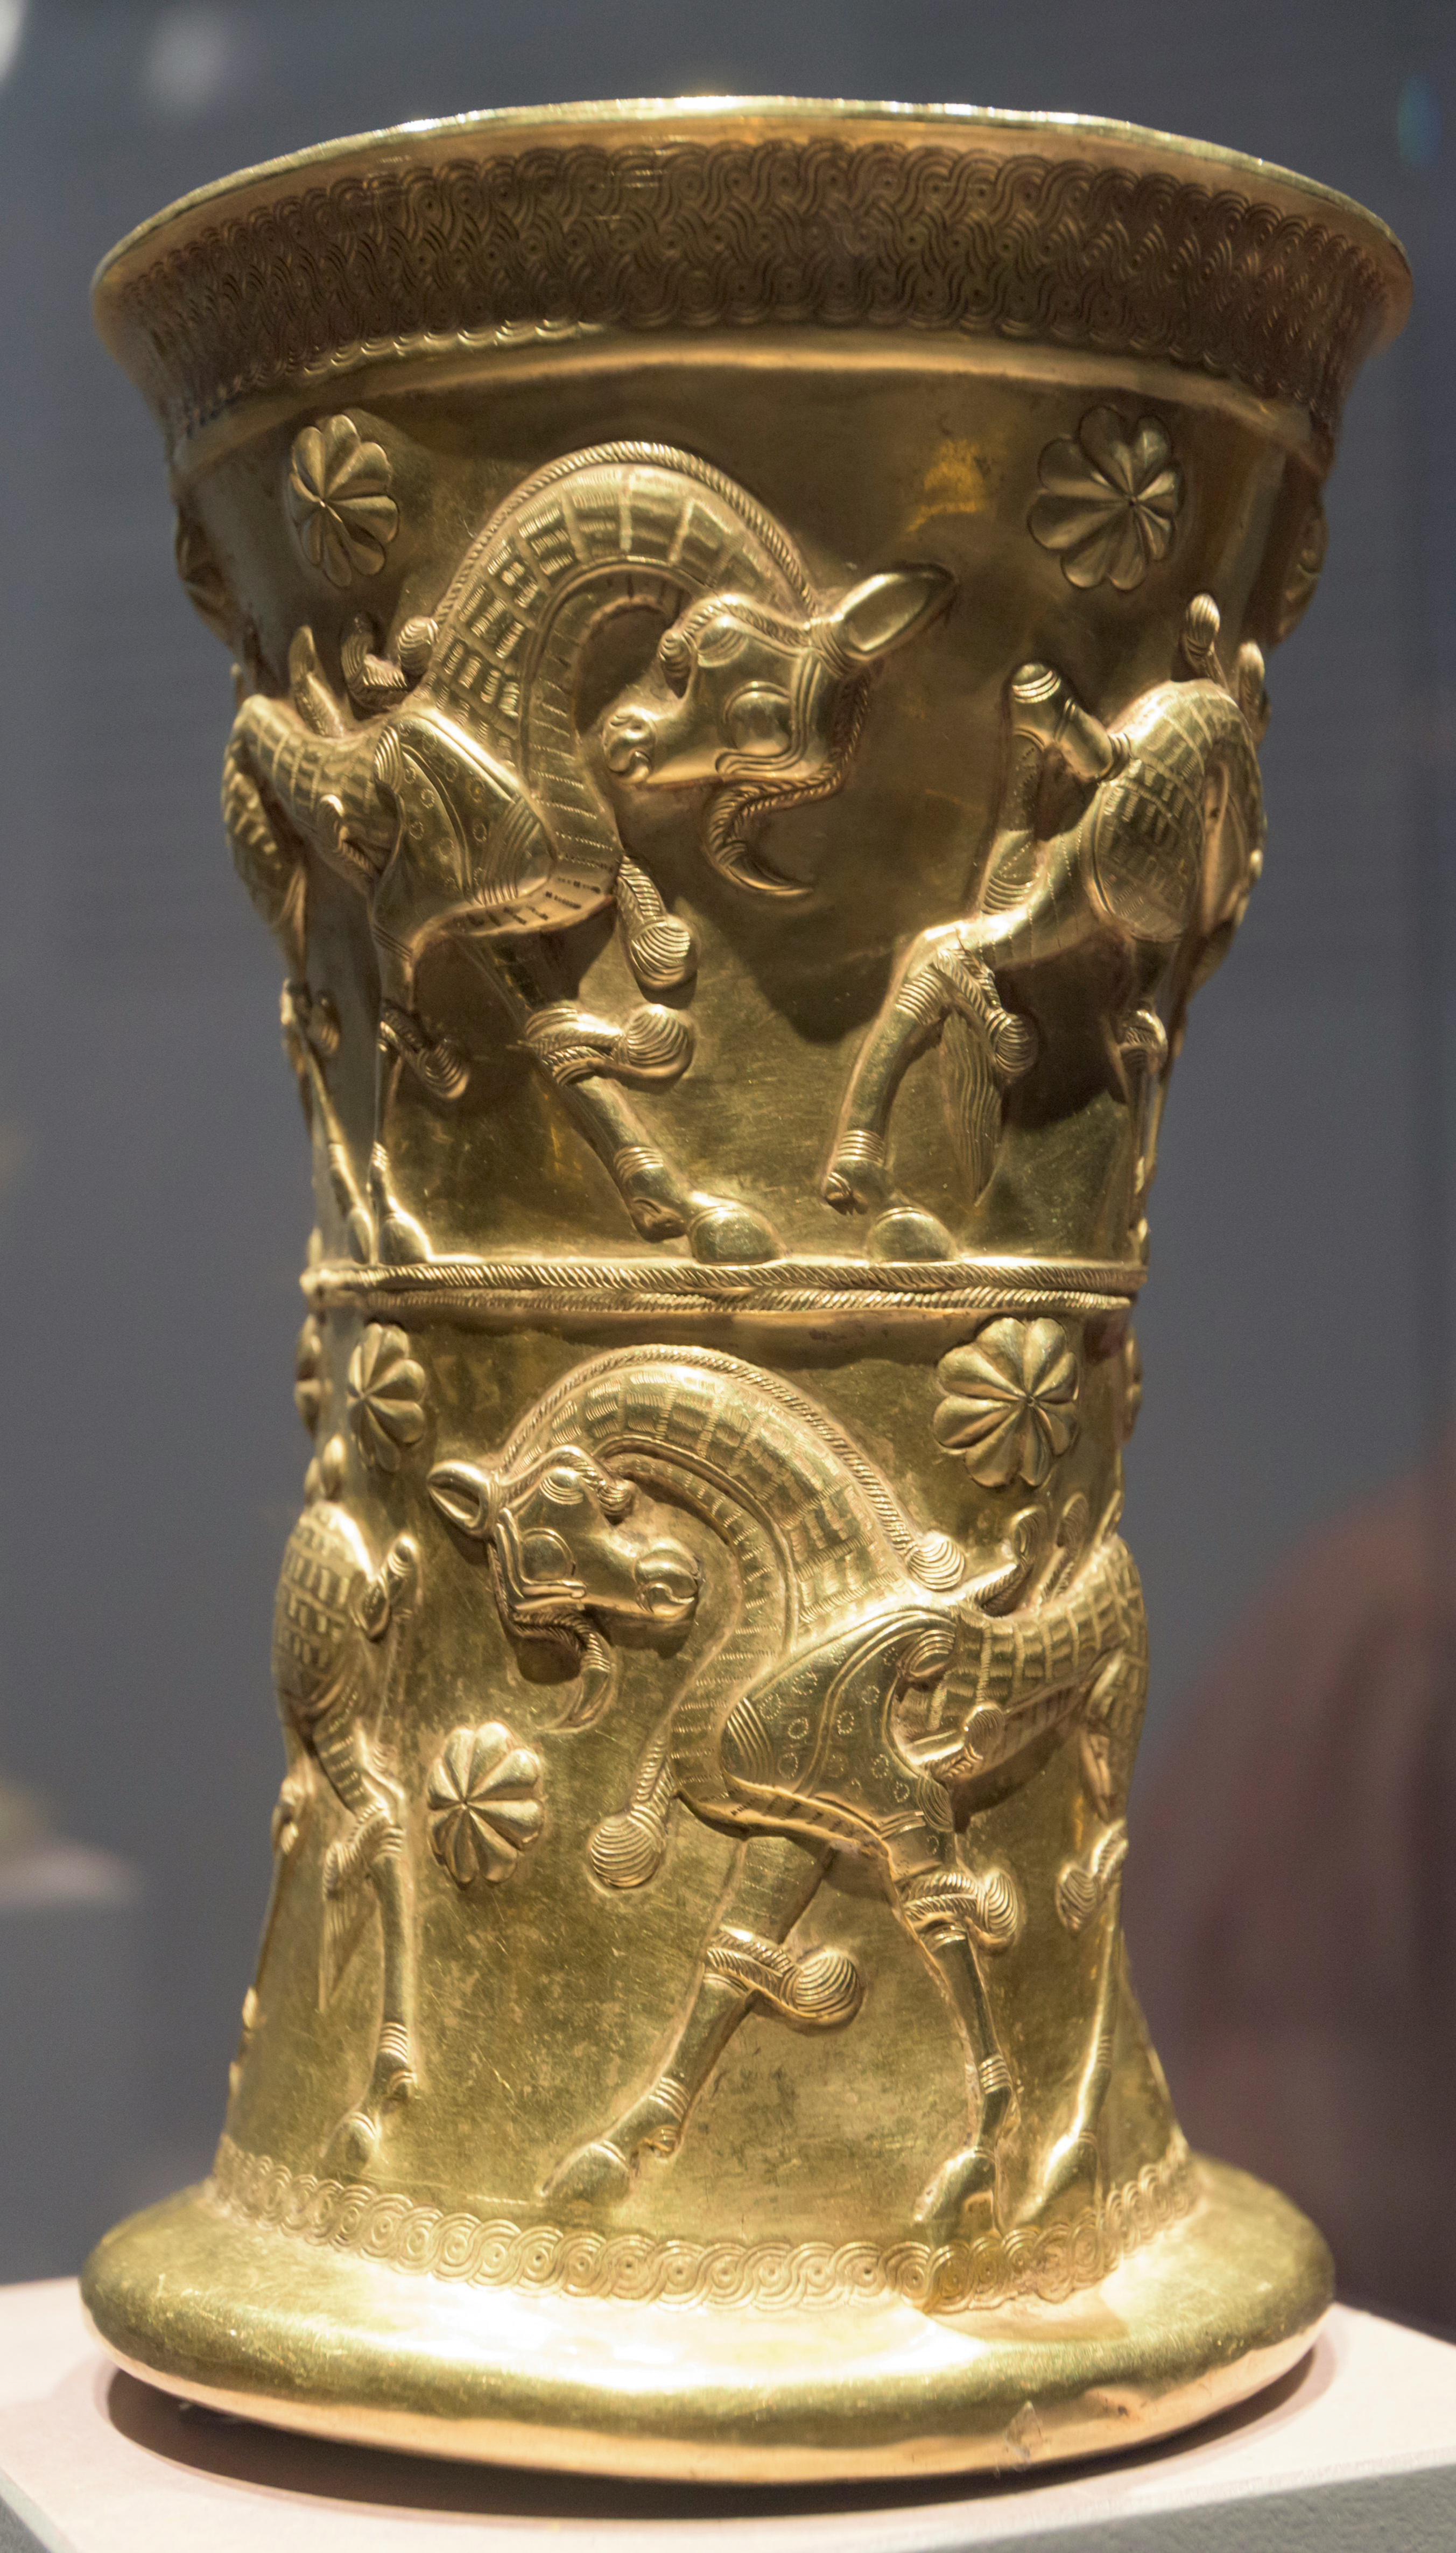 A gold beaker from the royal cemetery of Marlik in Iran.1150-850 BCE, now housed at the National Museum of Iran.jpg